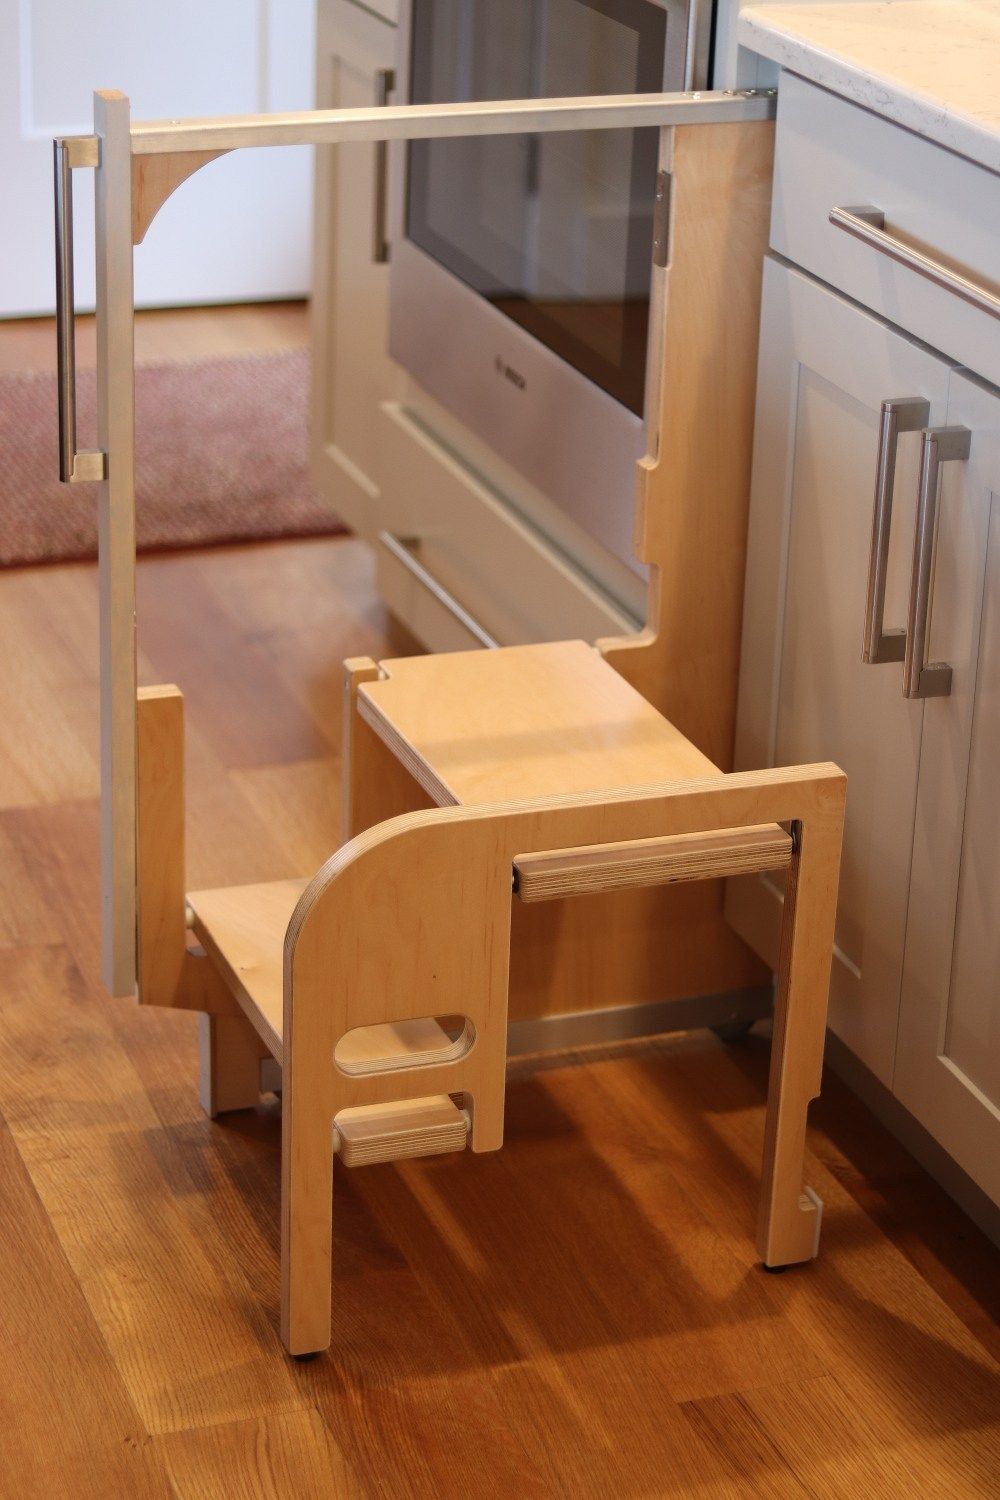 Wooden step stool: perfect for growing
kids